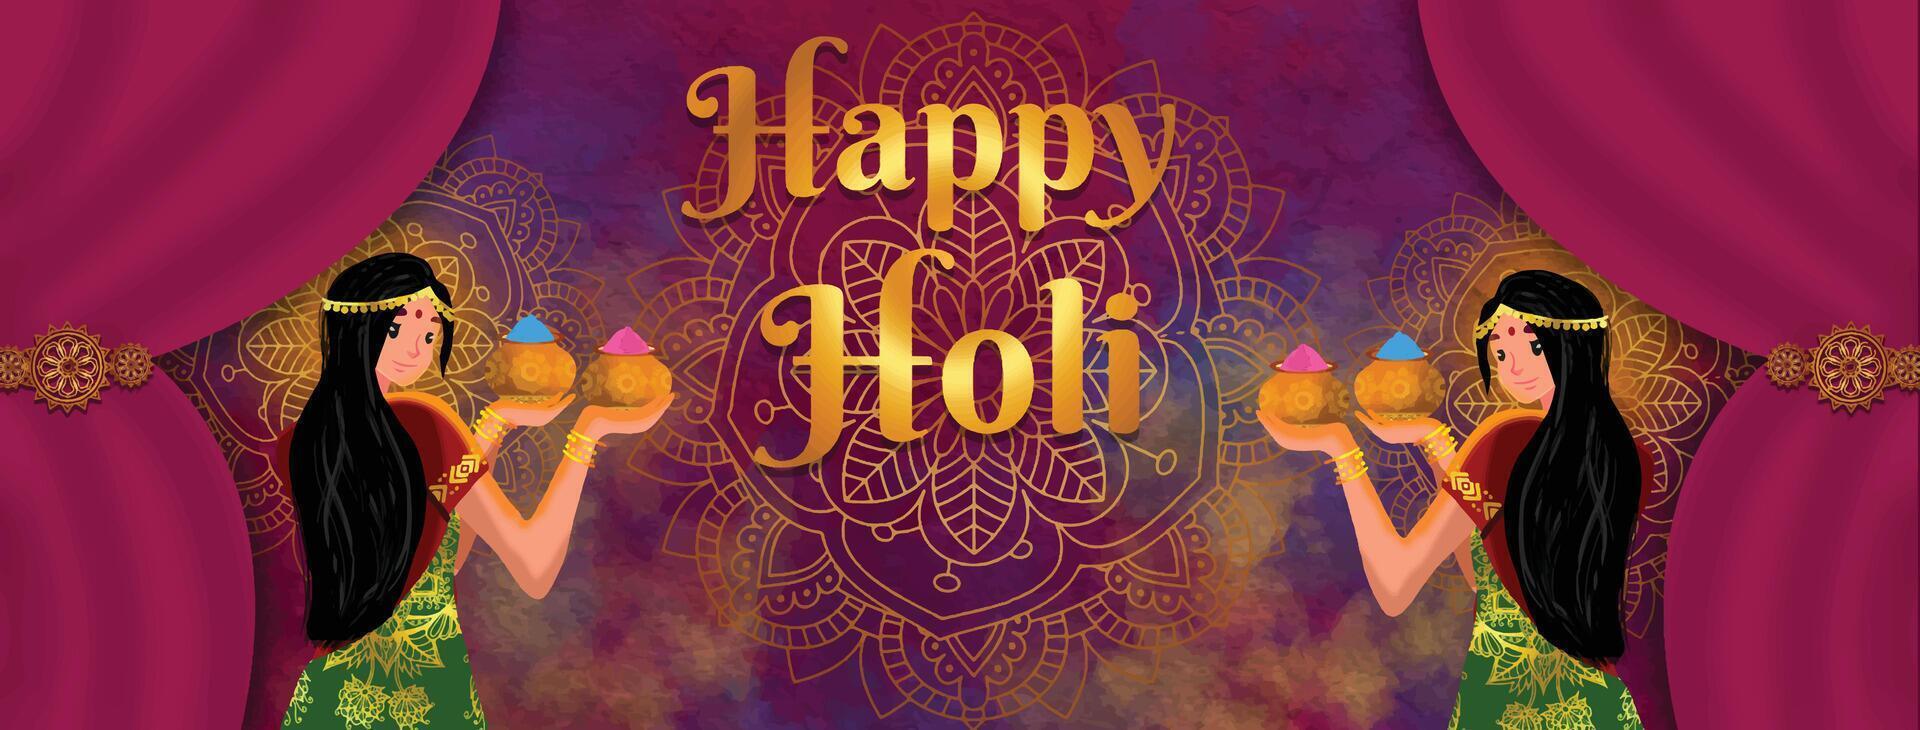 happy Holi , illustration of colorful promotional background for Festival of Colors celebration vector